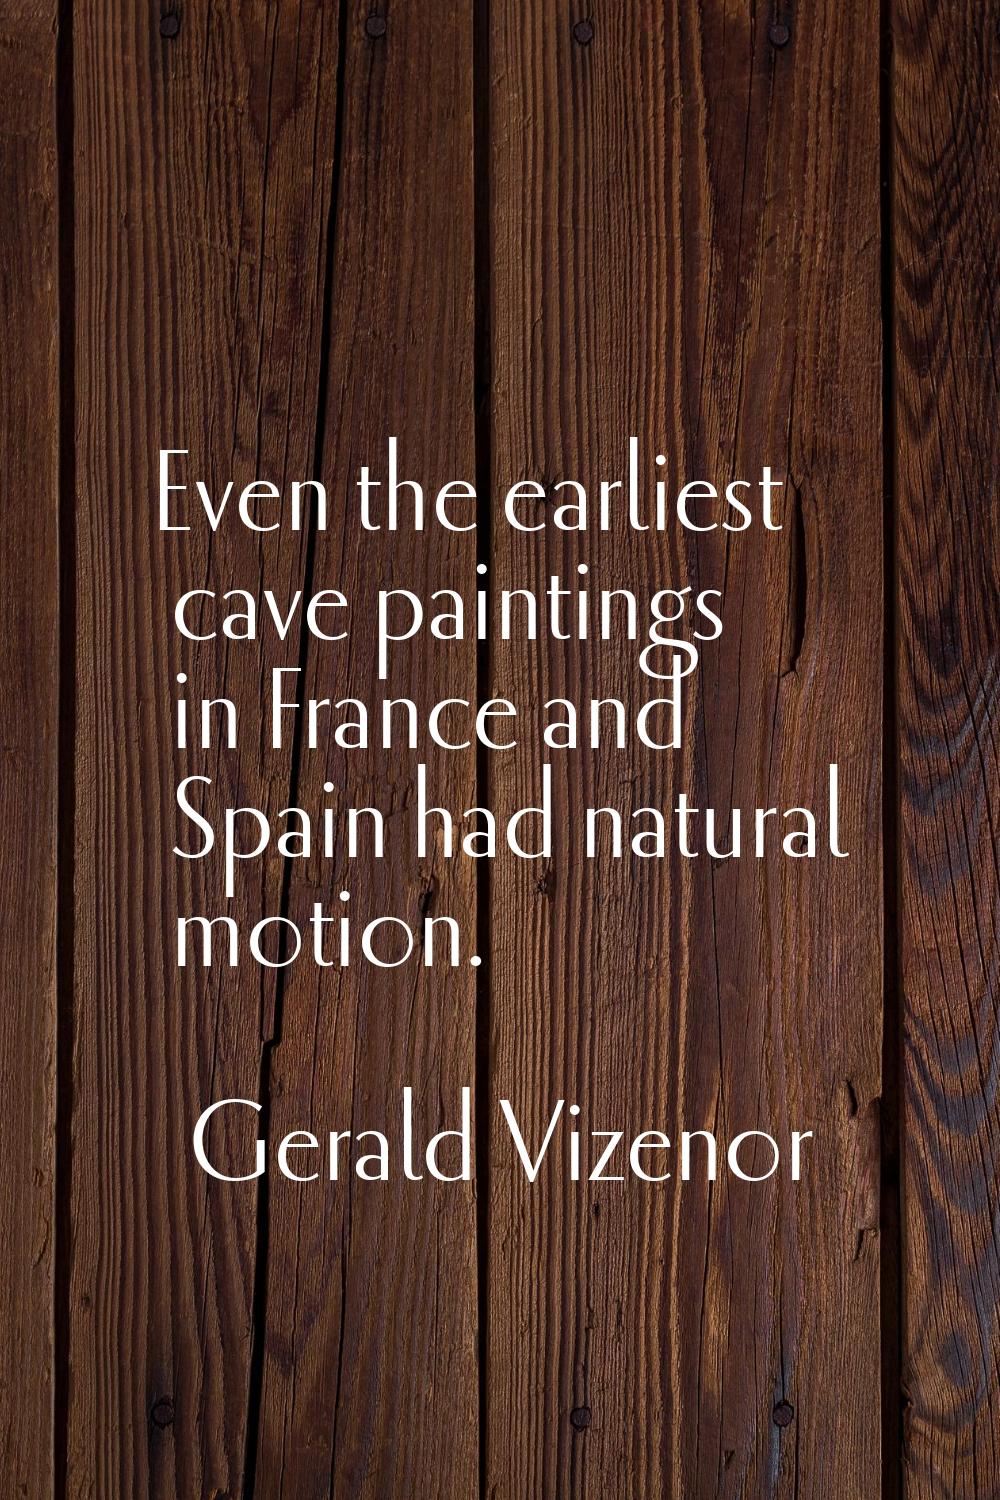 Even the earliest cave paintings in France and Spain had natural motion.